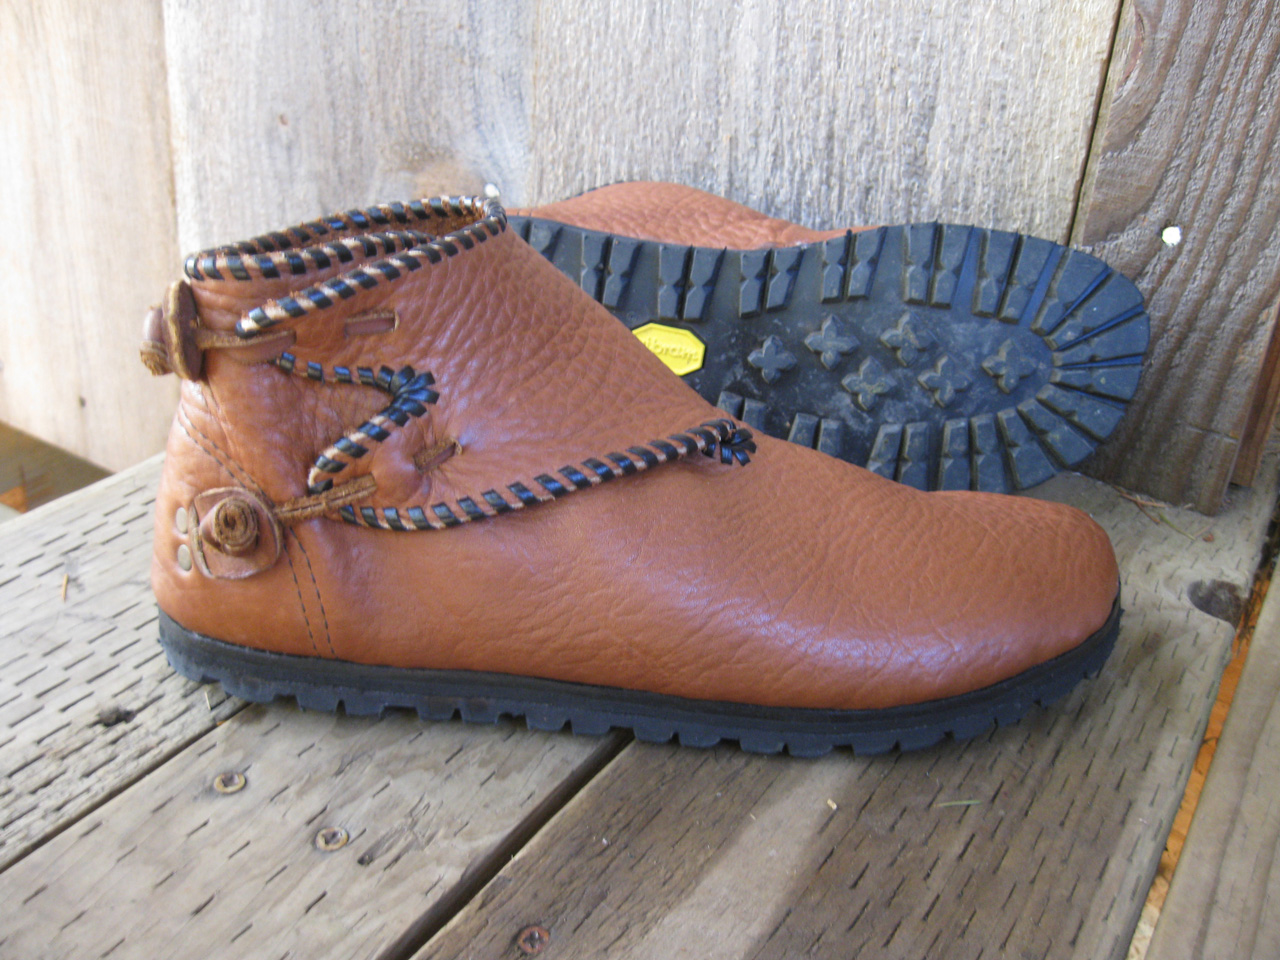 Fancy buttons, decorative stitching and serious Vibram soles make these sharp looking boots